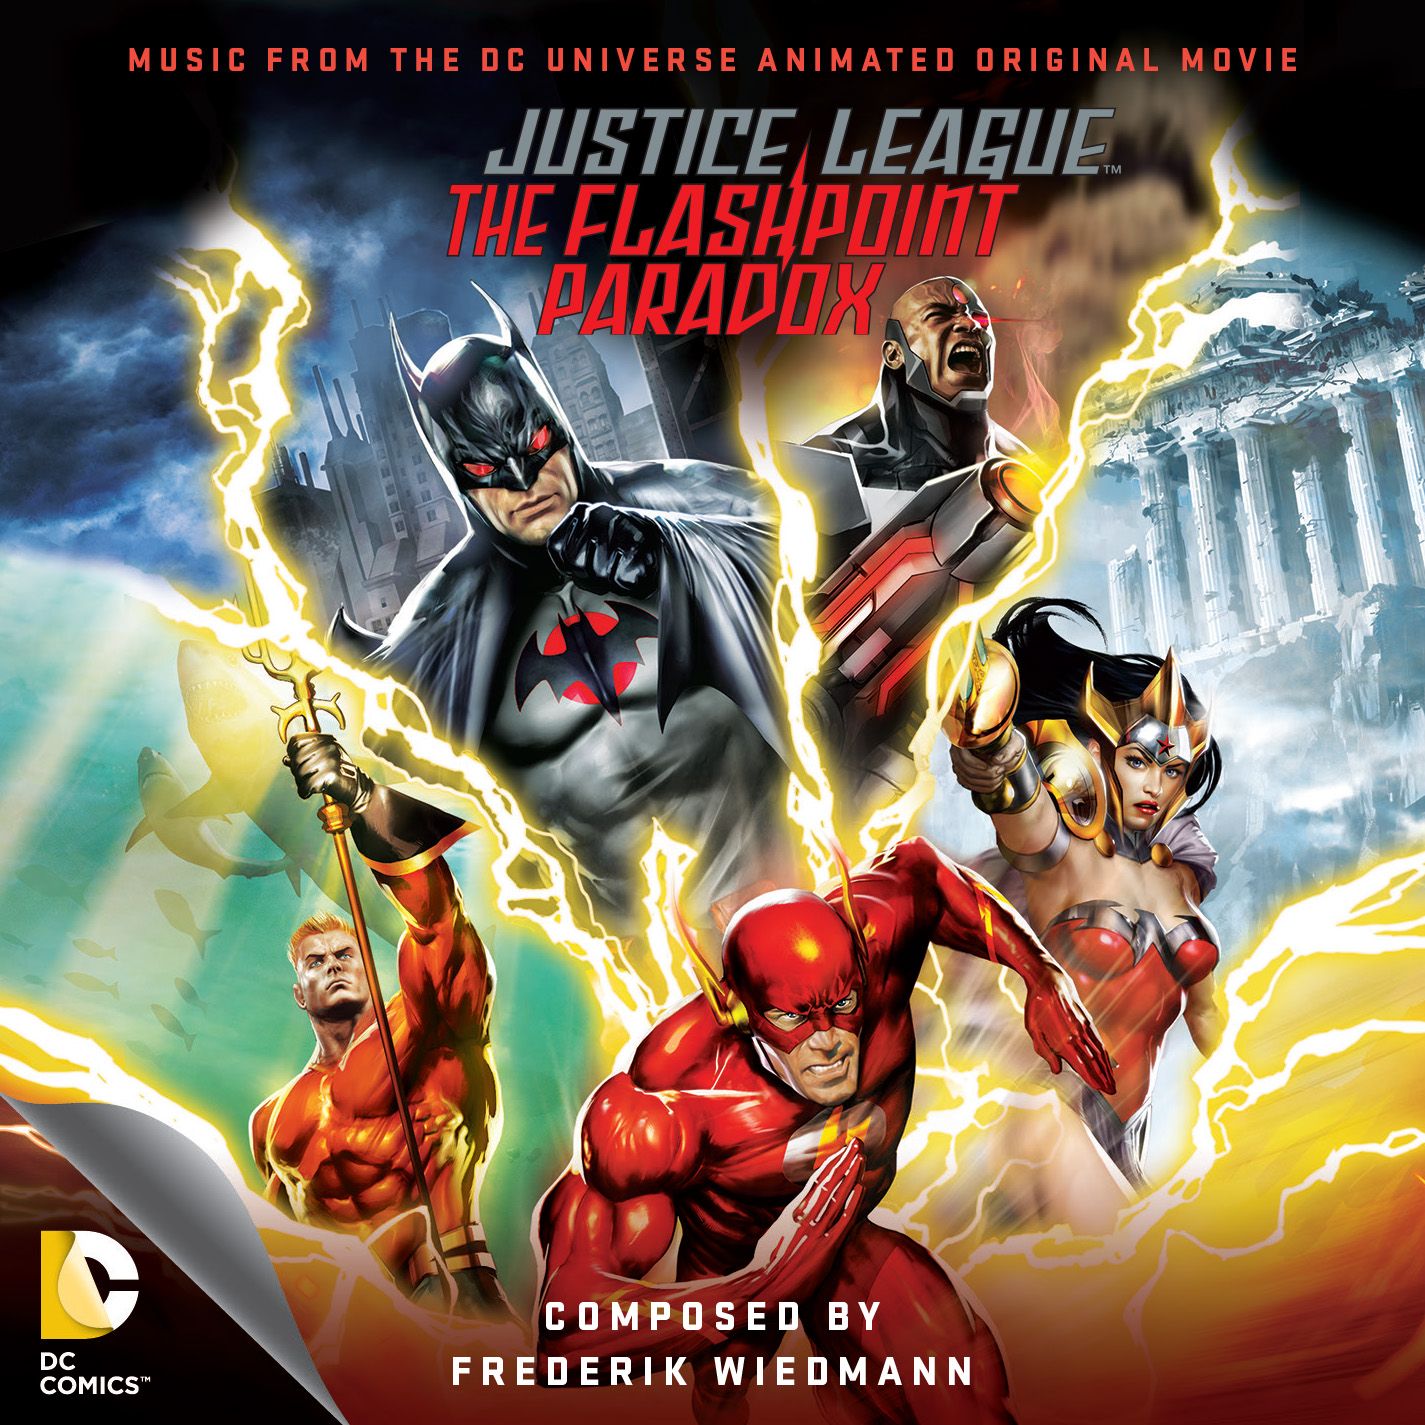 Justice League: The Flashpoint Paradox wallpaper, Movie, HQ Justice League: The Flashpoint Paradox pictureK Wallpaper 2019